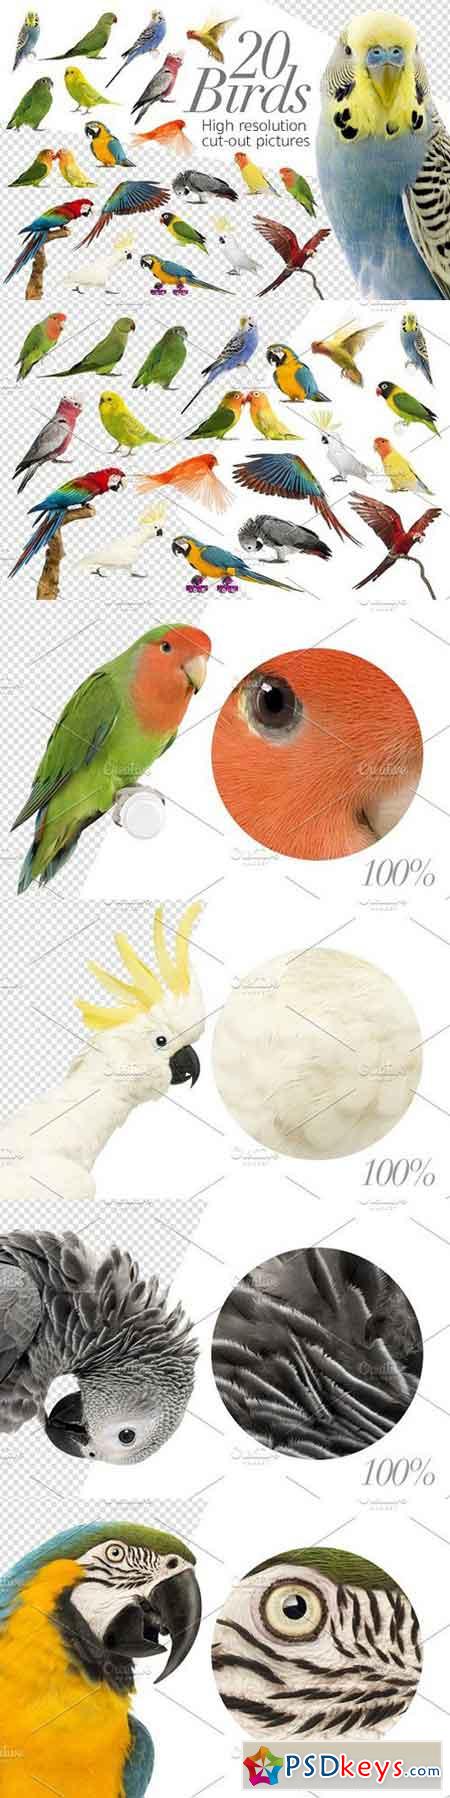 20 Birds - Cut-out High Res Pictures 1353076